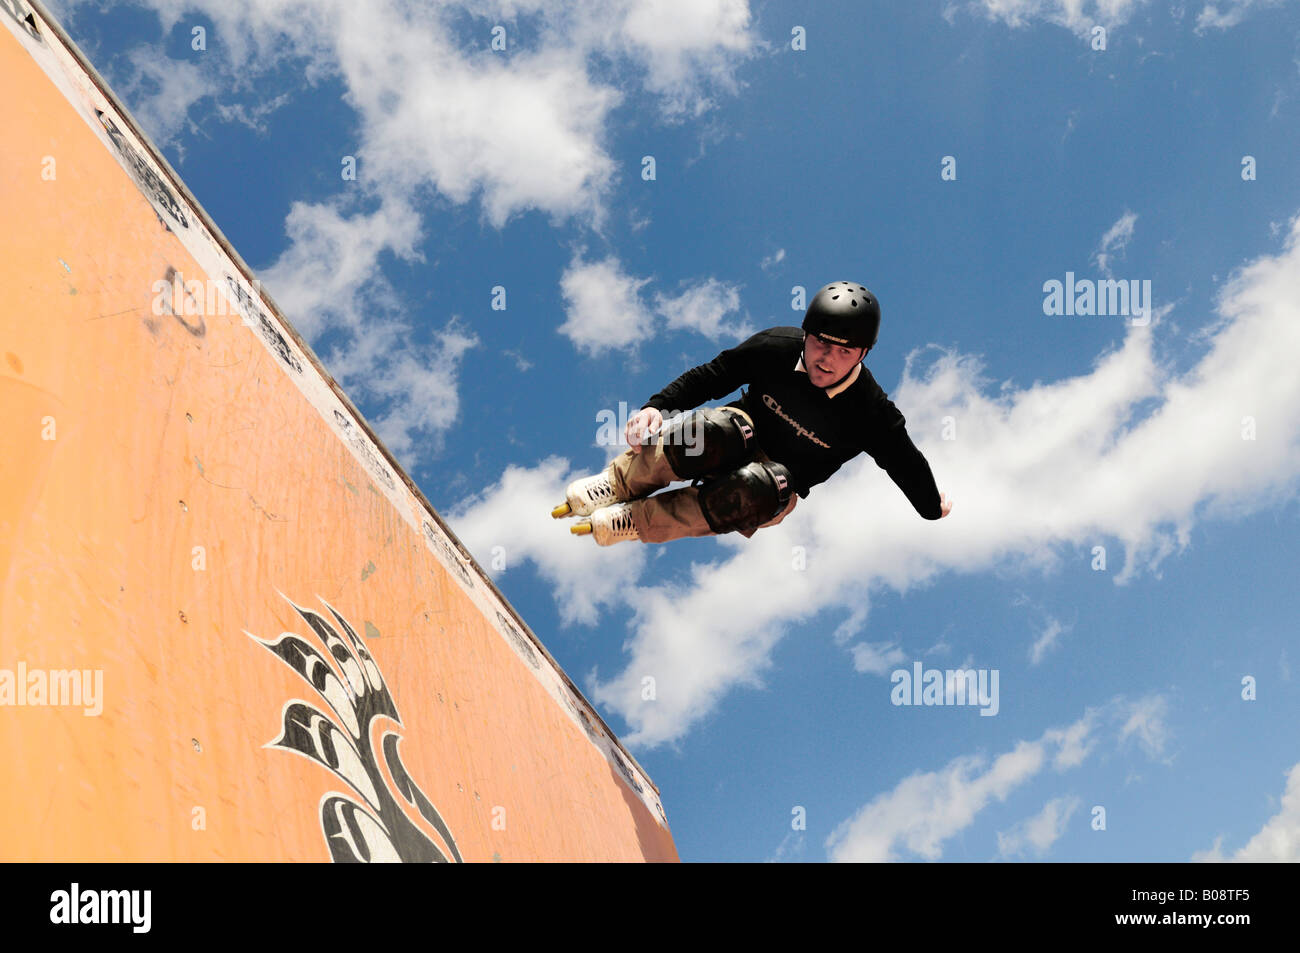 https://c8.alamy.com/comp/B08TF5/inline-skater-or-roller-blader-jumping-from-half-pipe-B08TF5.jpg